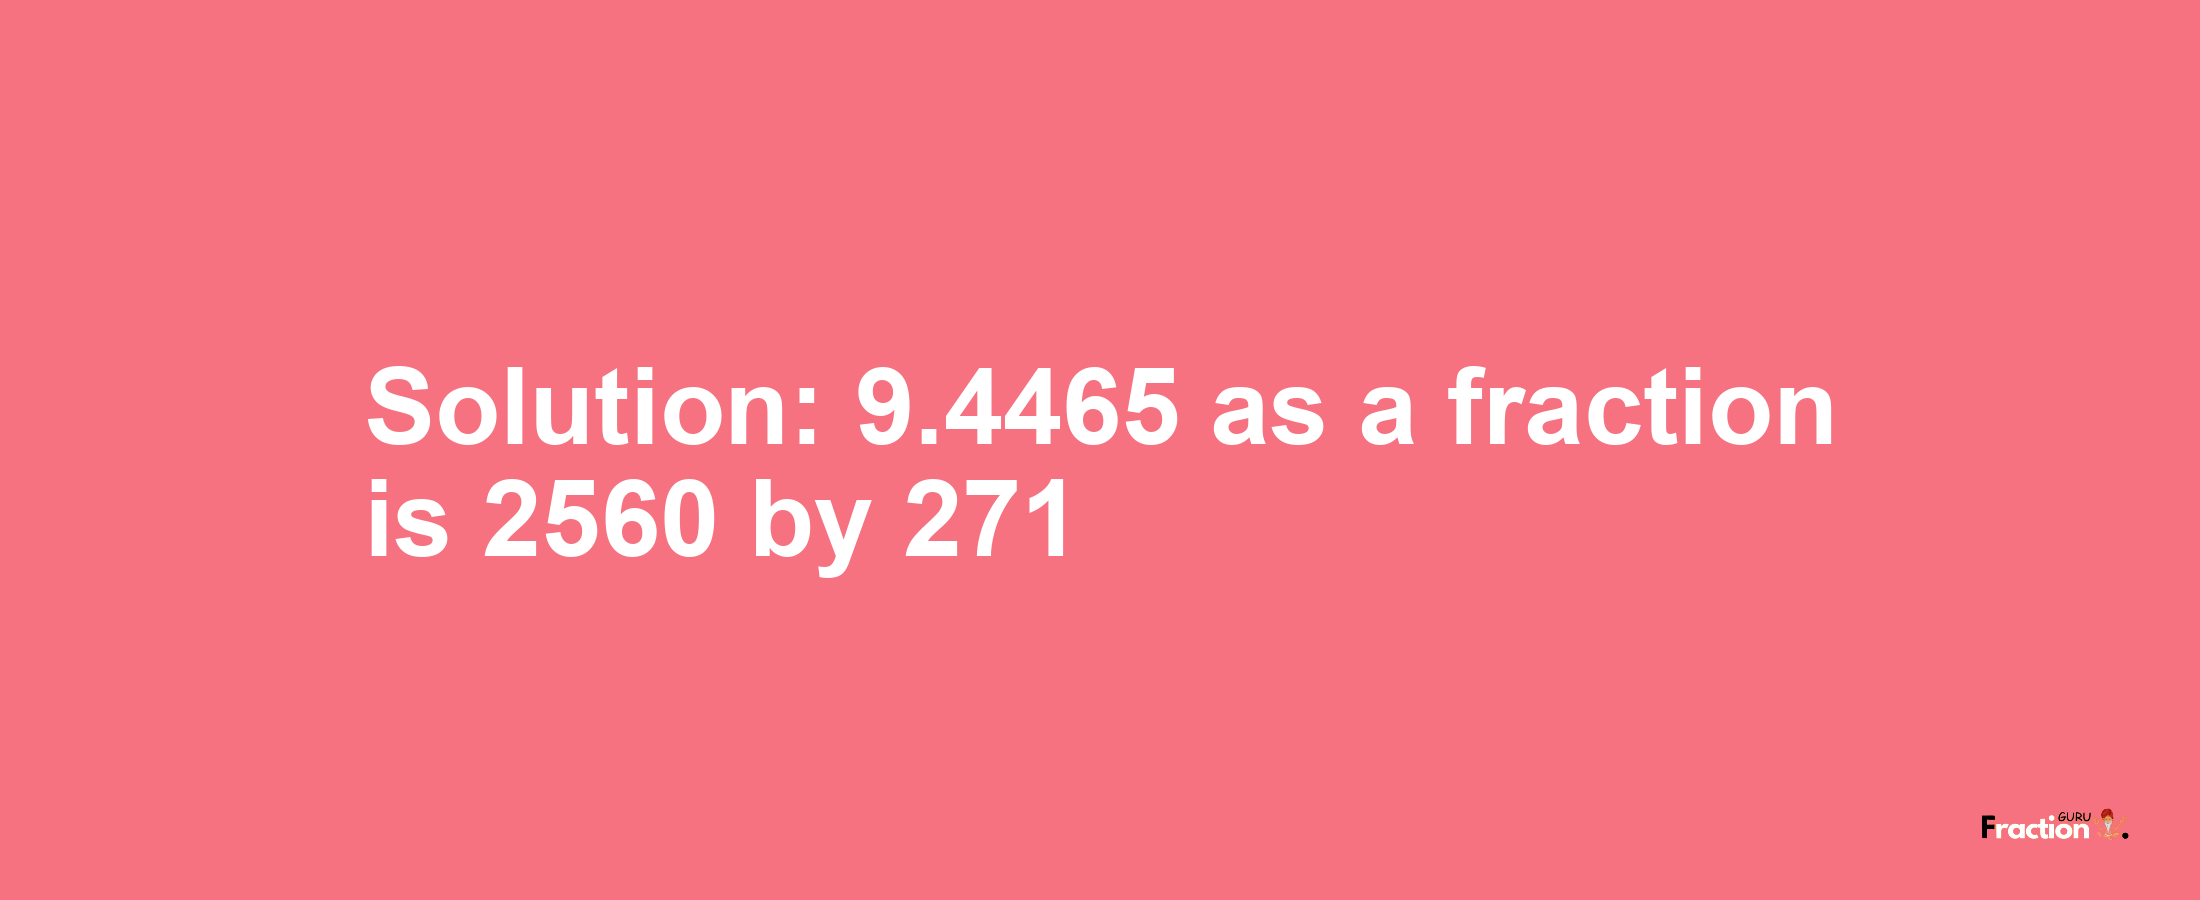 Solution:9.4465 as a fraction is 2560/271